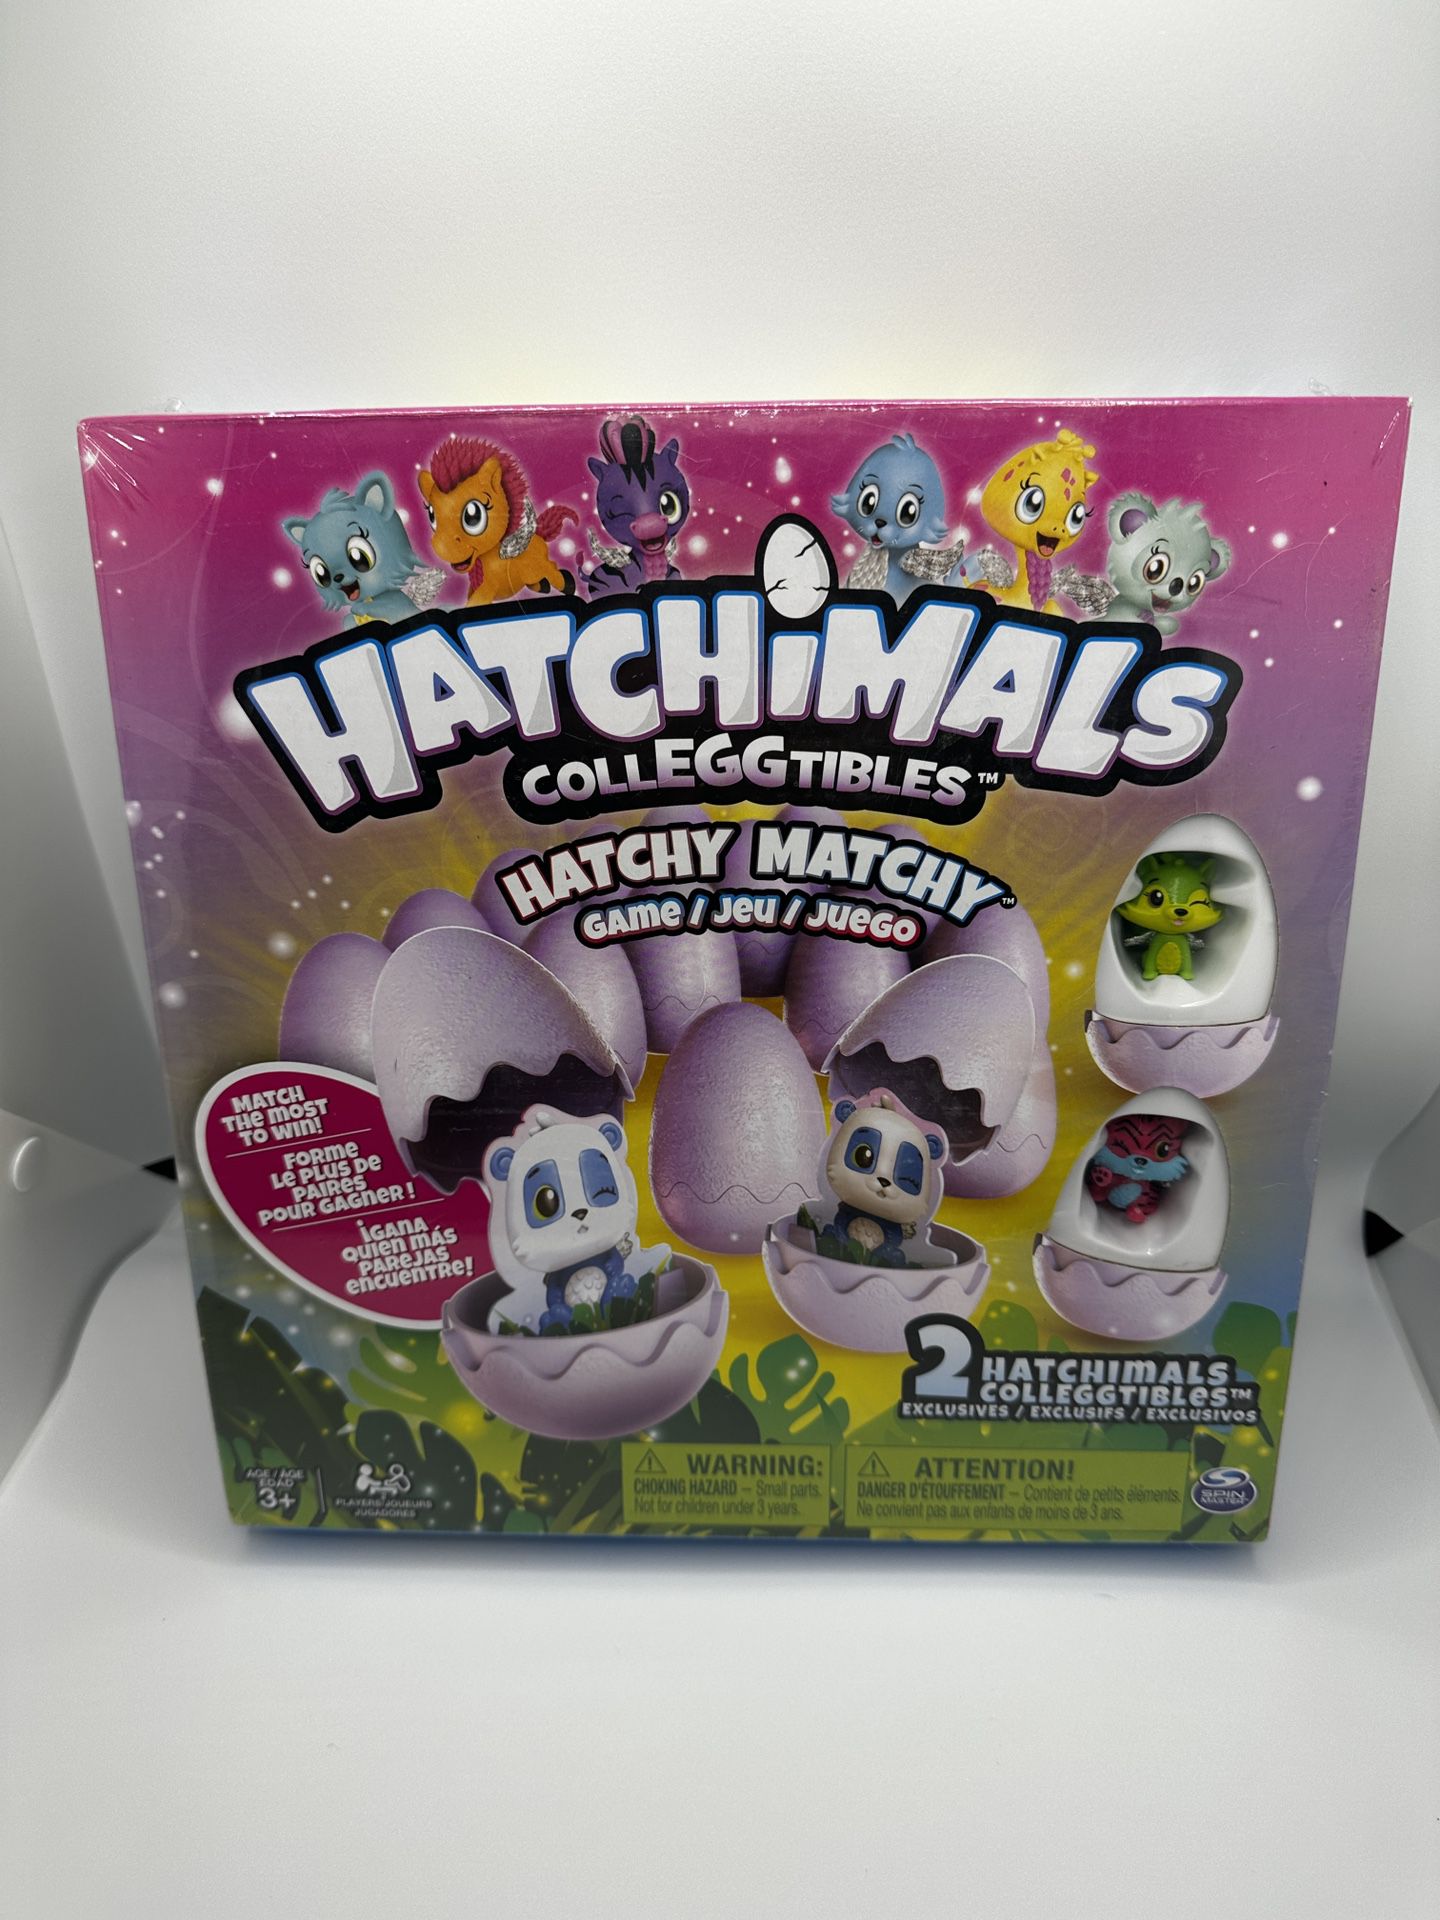 *35th Ave & Greenway* SEALED Hatchimals collEGGtables – Hatchy Matchy Game With 2 Exclusive Characters  New never opened  